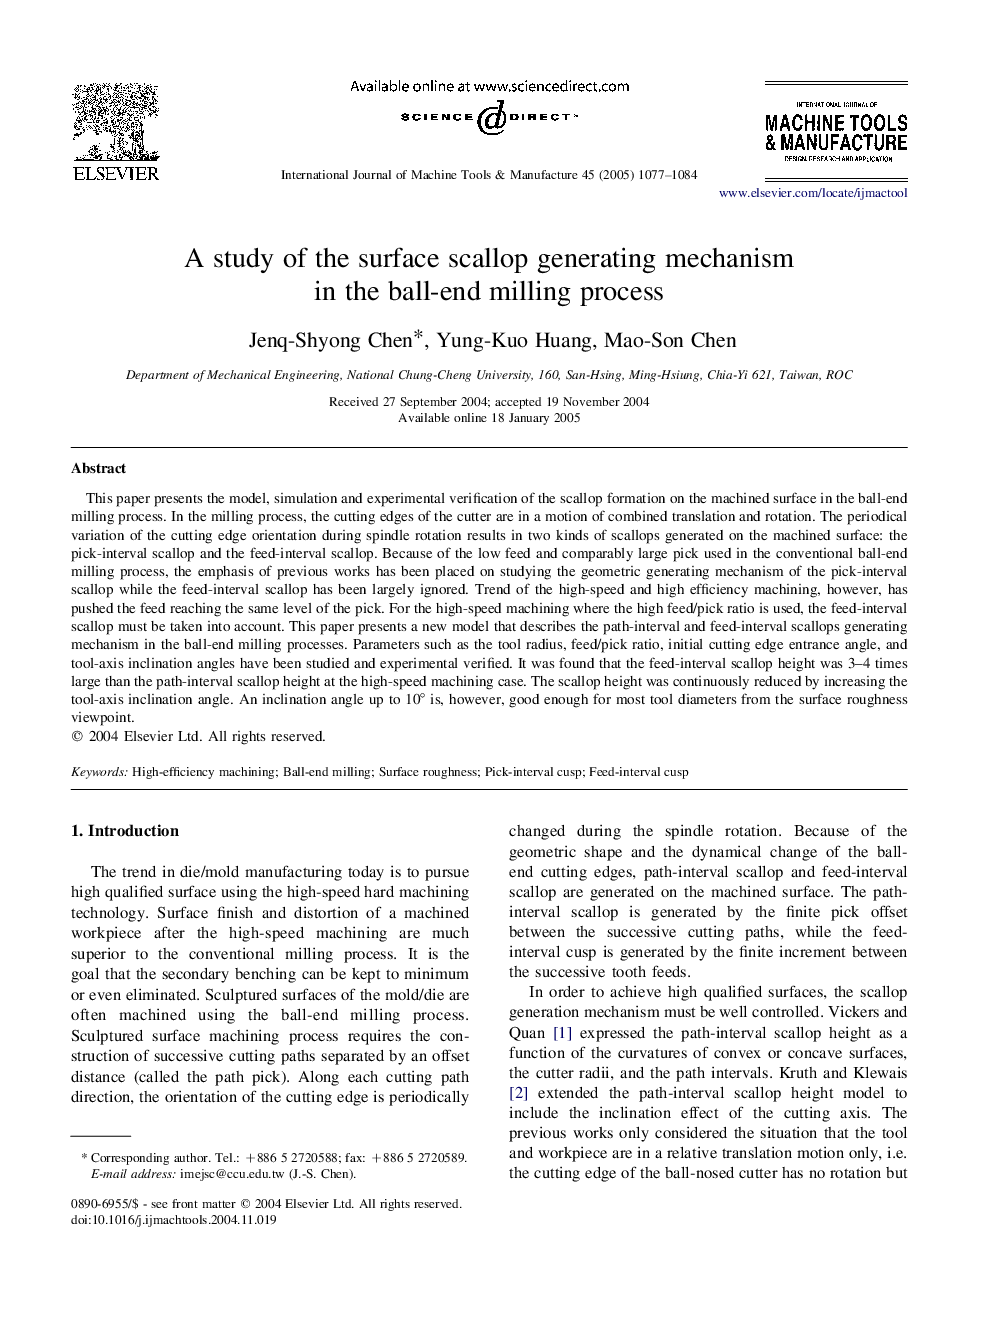 A study of the surface scallop generating mechanism in the ball-end milling process